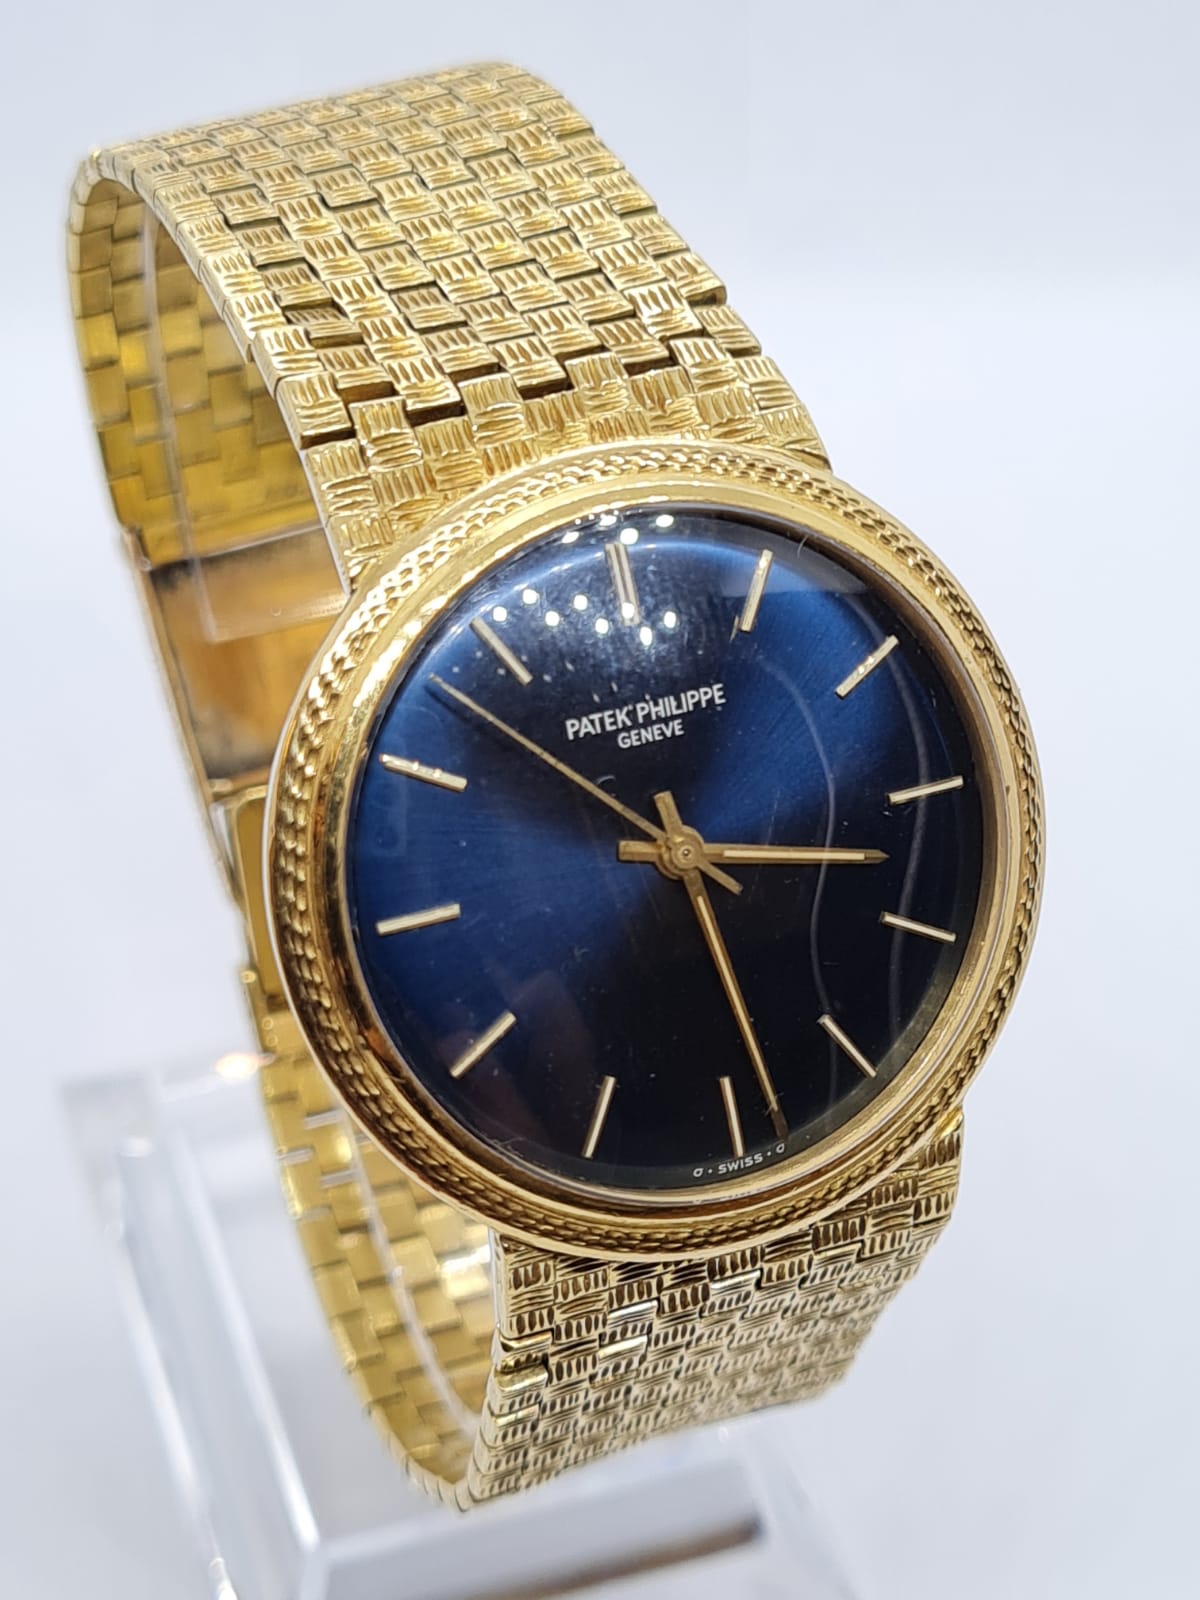 PATEK PHILIPPE GENEVE gent watch with blue face and 18k gold strap,36mm case 1970s model - Image 3 of 17